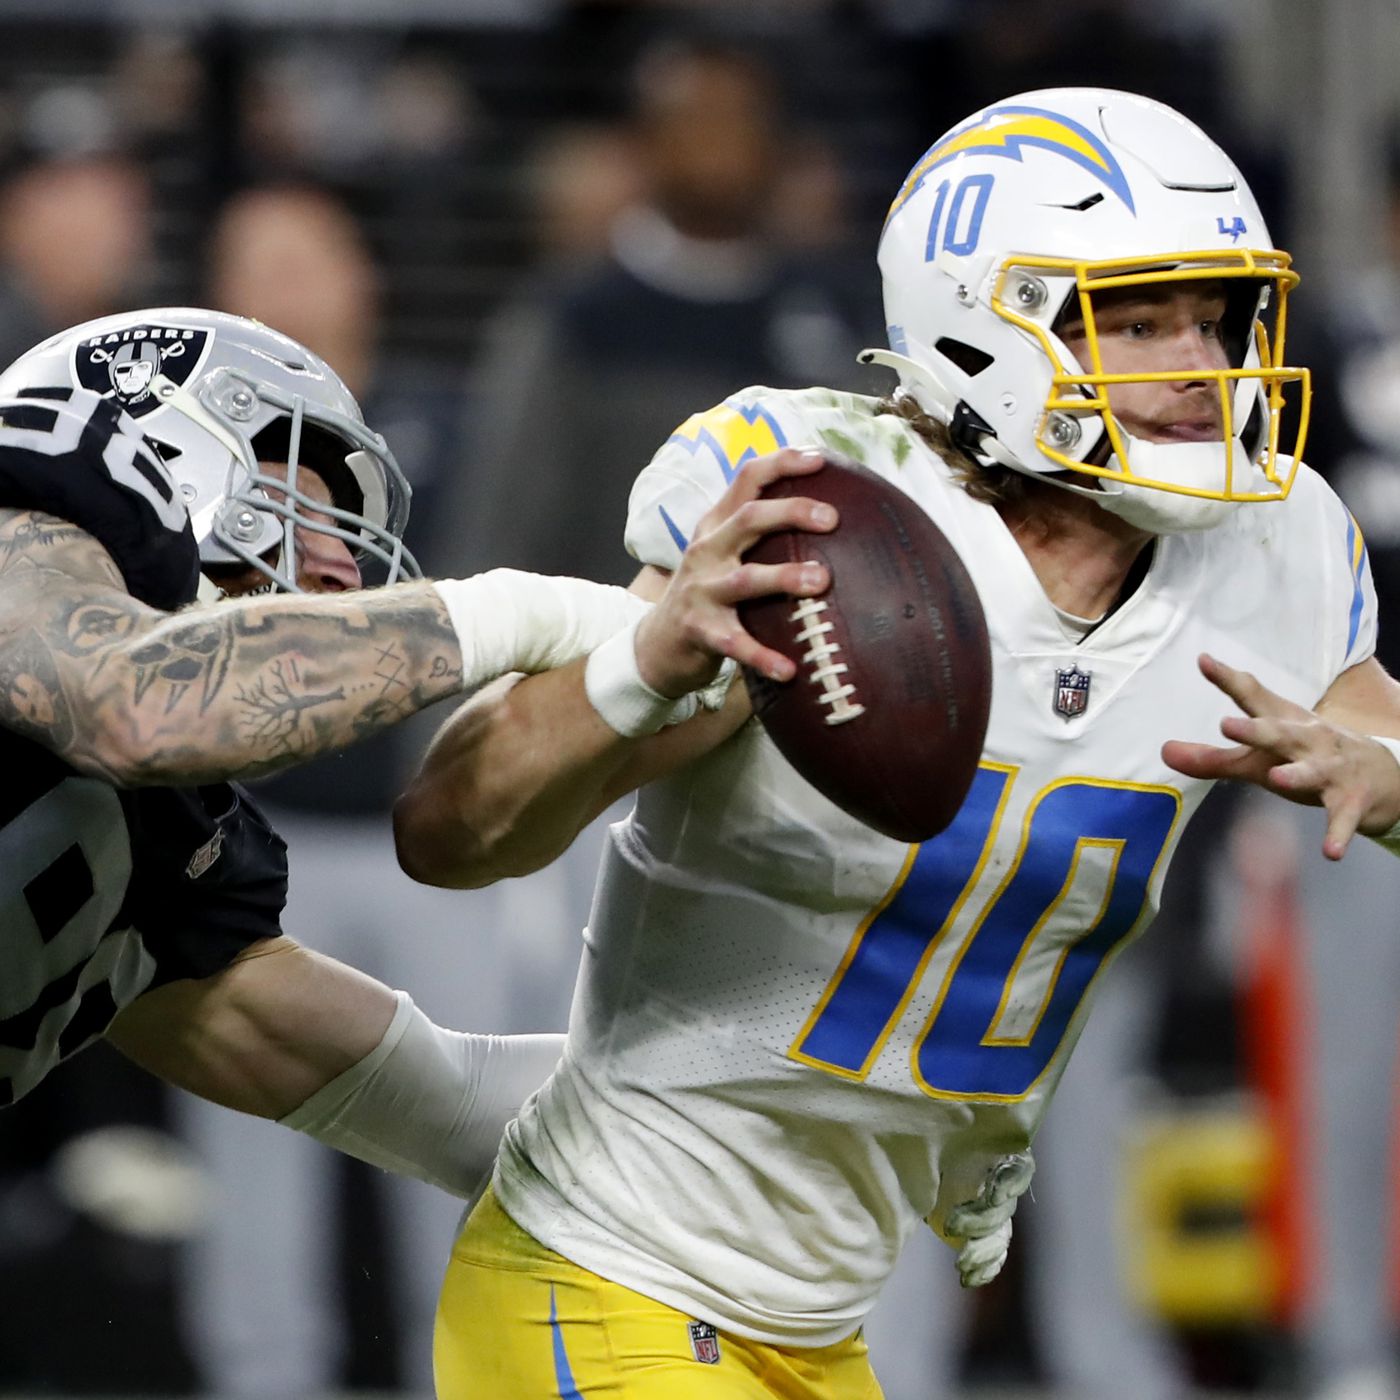 Week 13 Final Score: Chargers 20 - Raiders 27. Chargers now 6-6